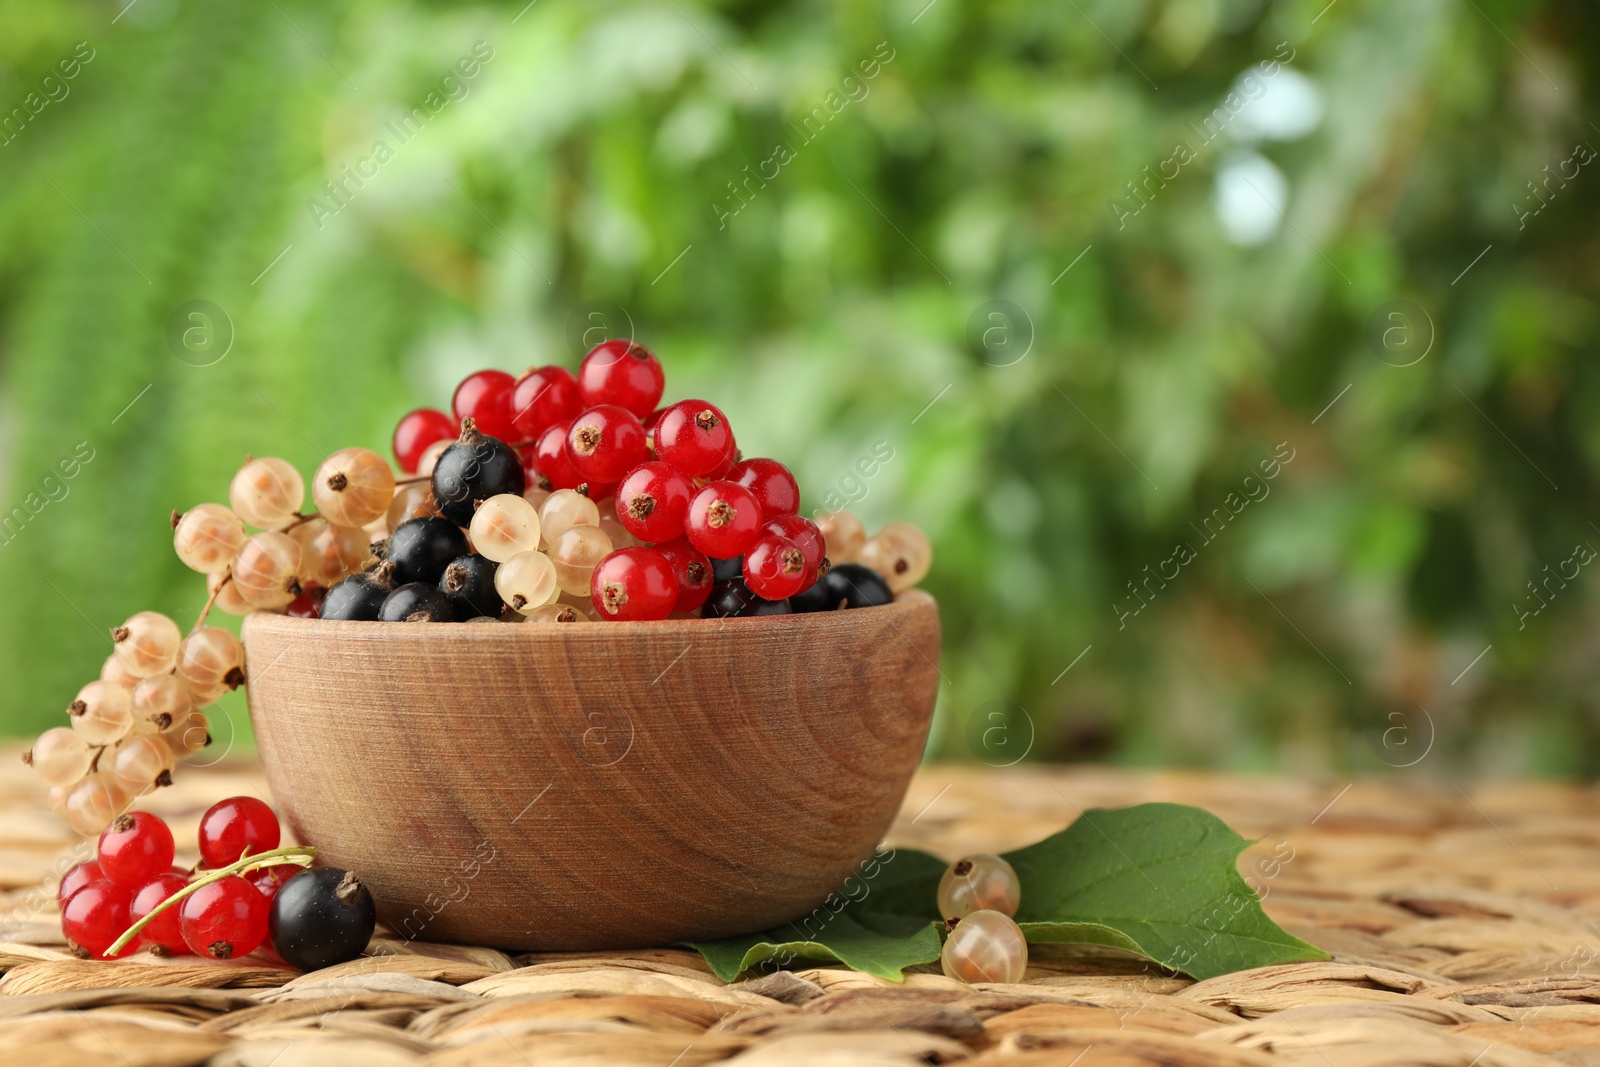 Photo of Different fresh ripe currants and green leaf on wicker surface outdoors, space for text